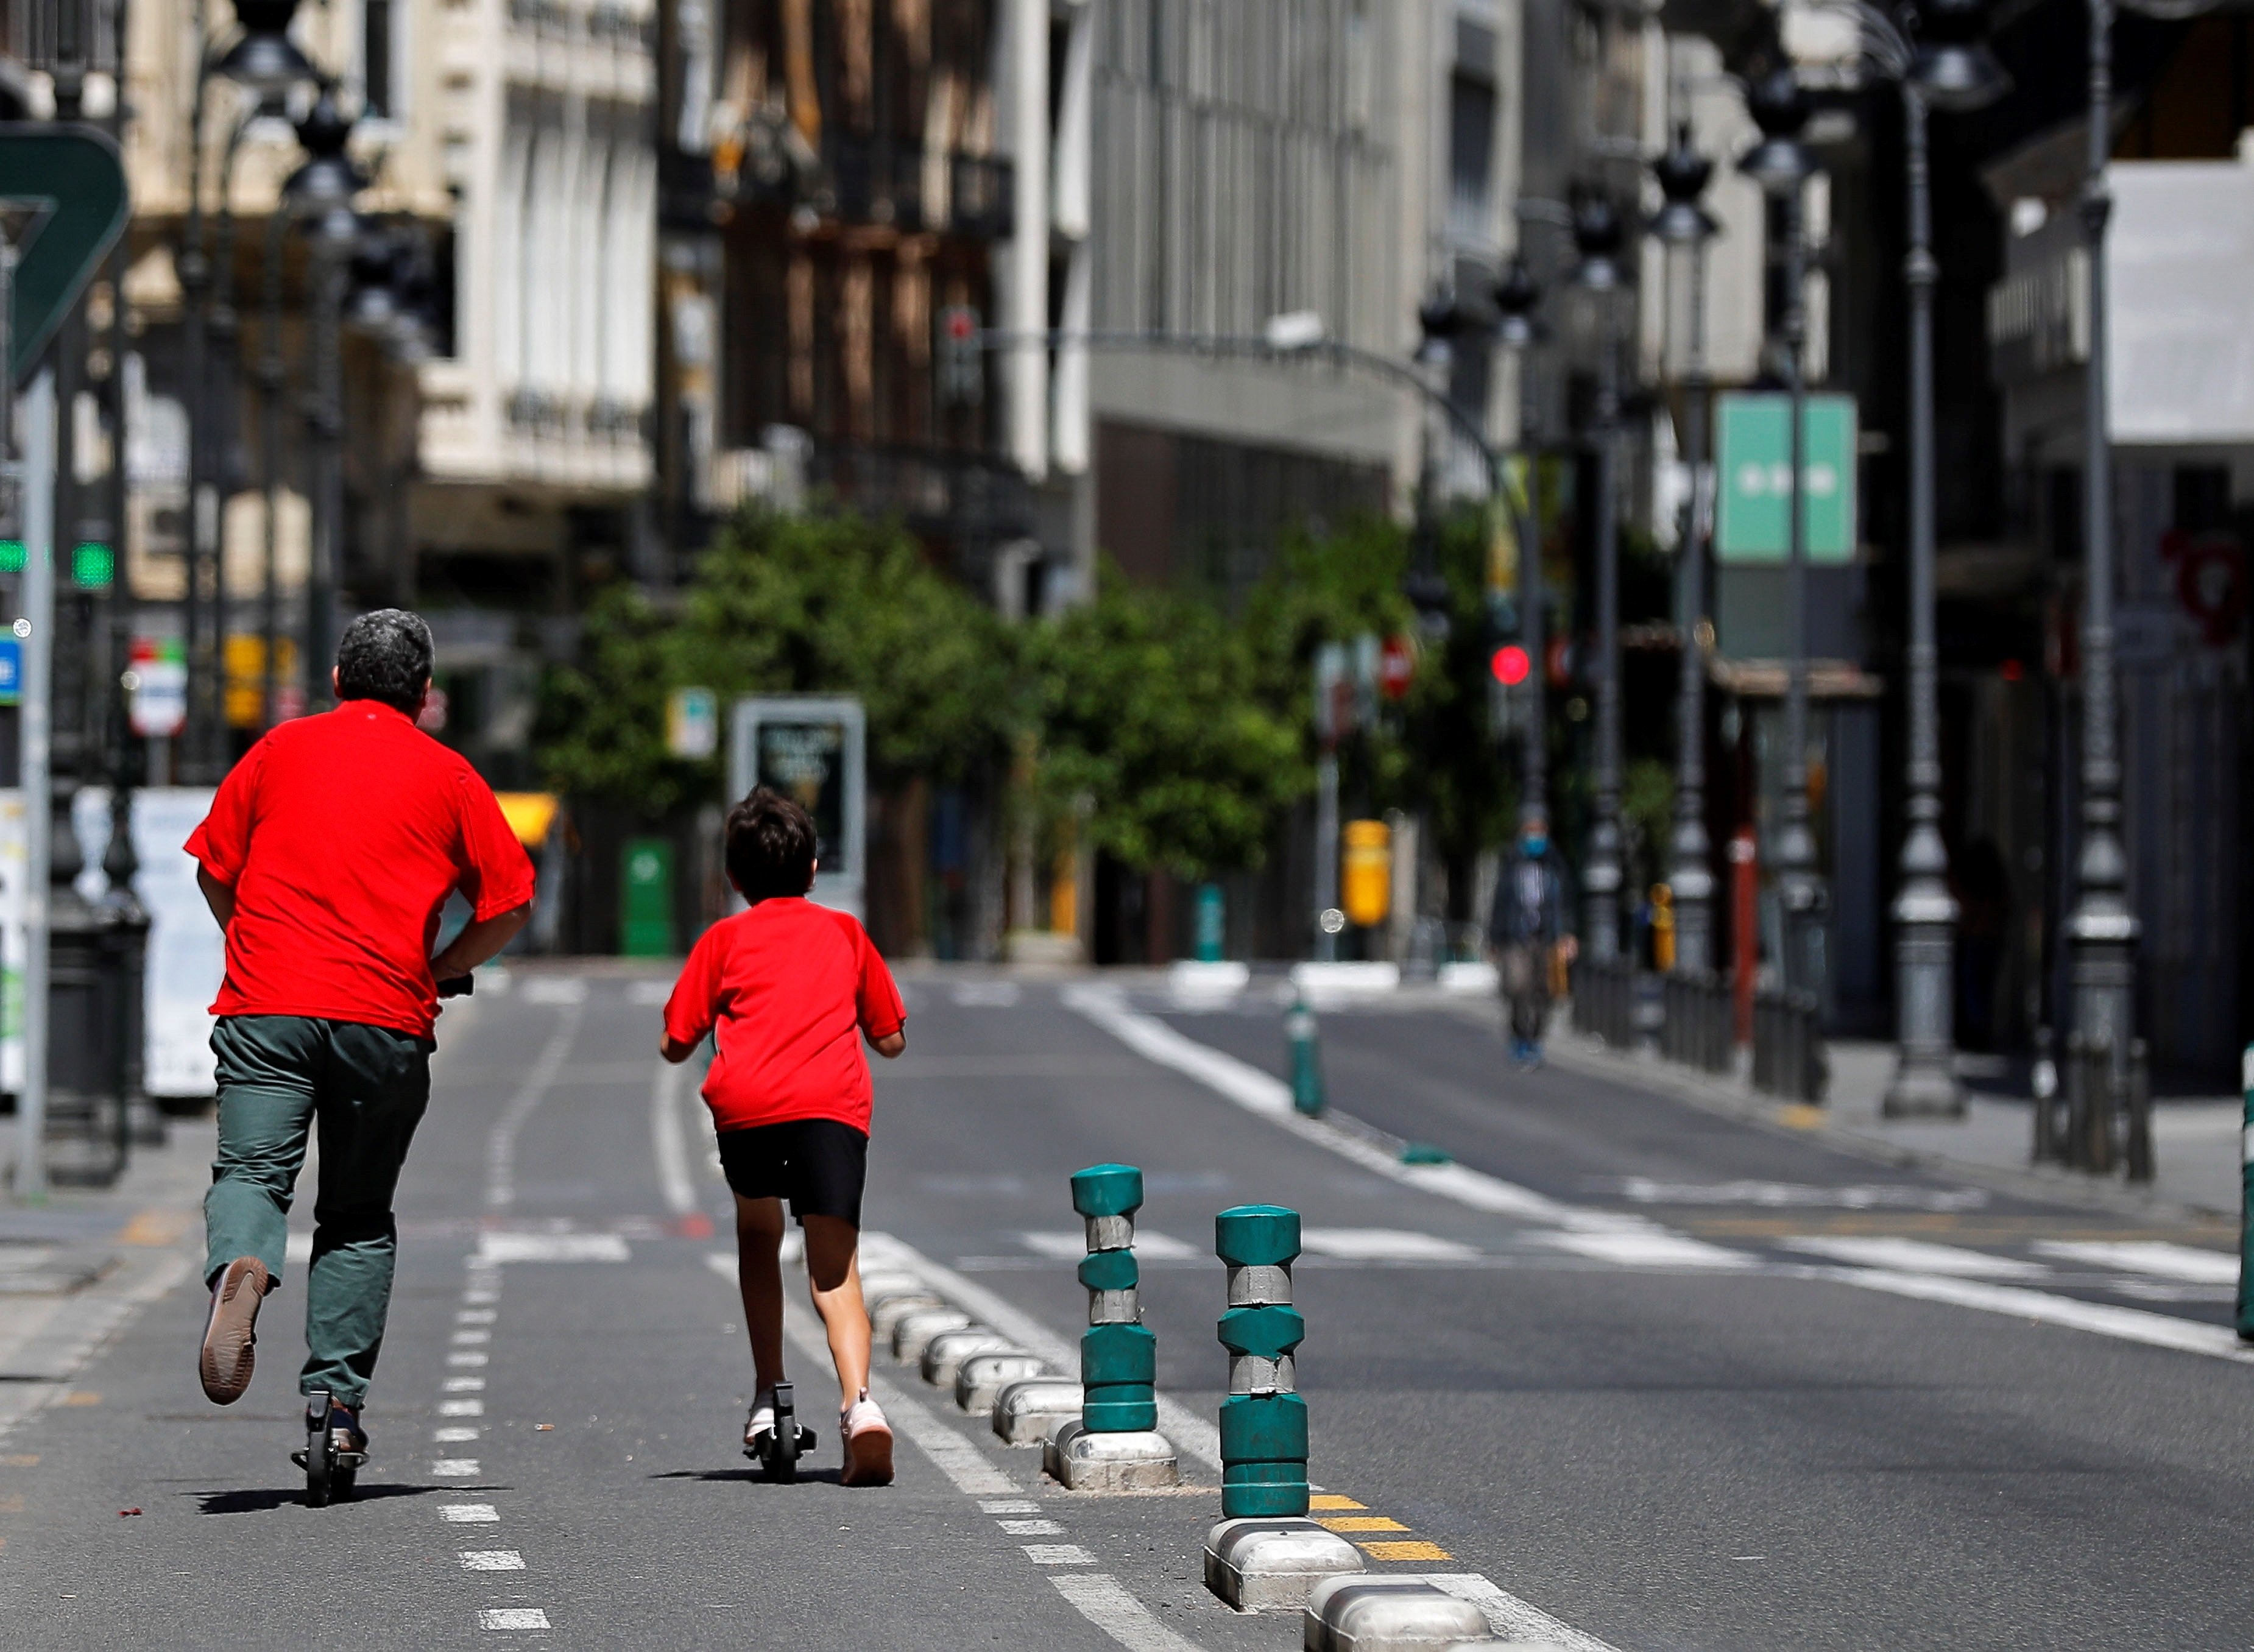 The rules on walks and exercise: Spain allows outdoor activities from Saturday